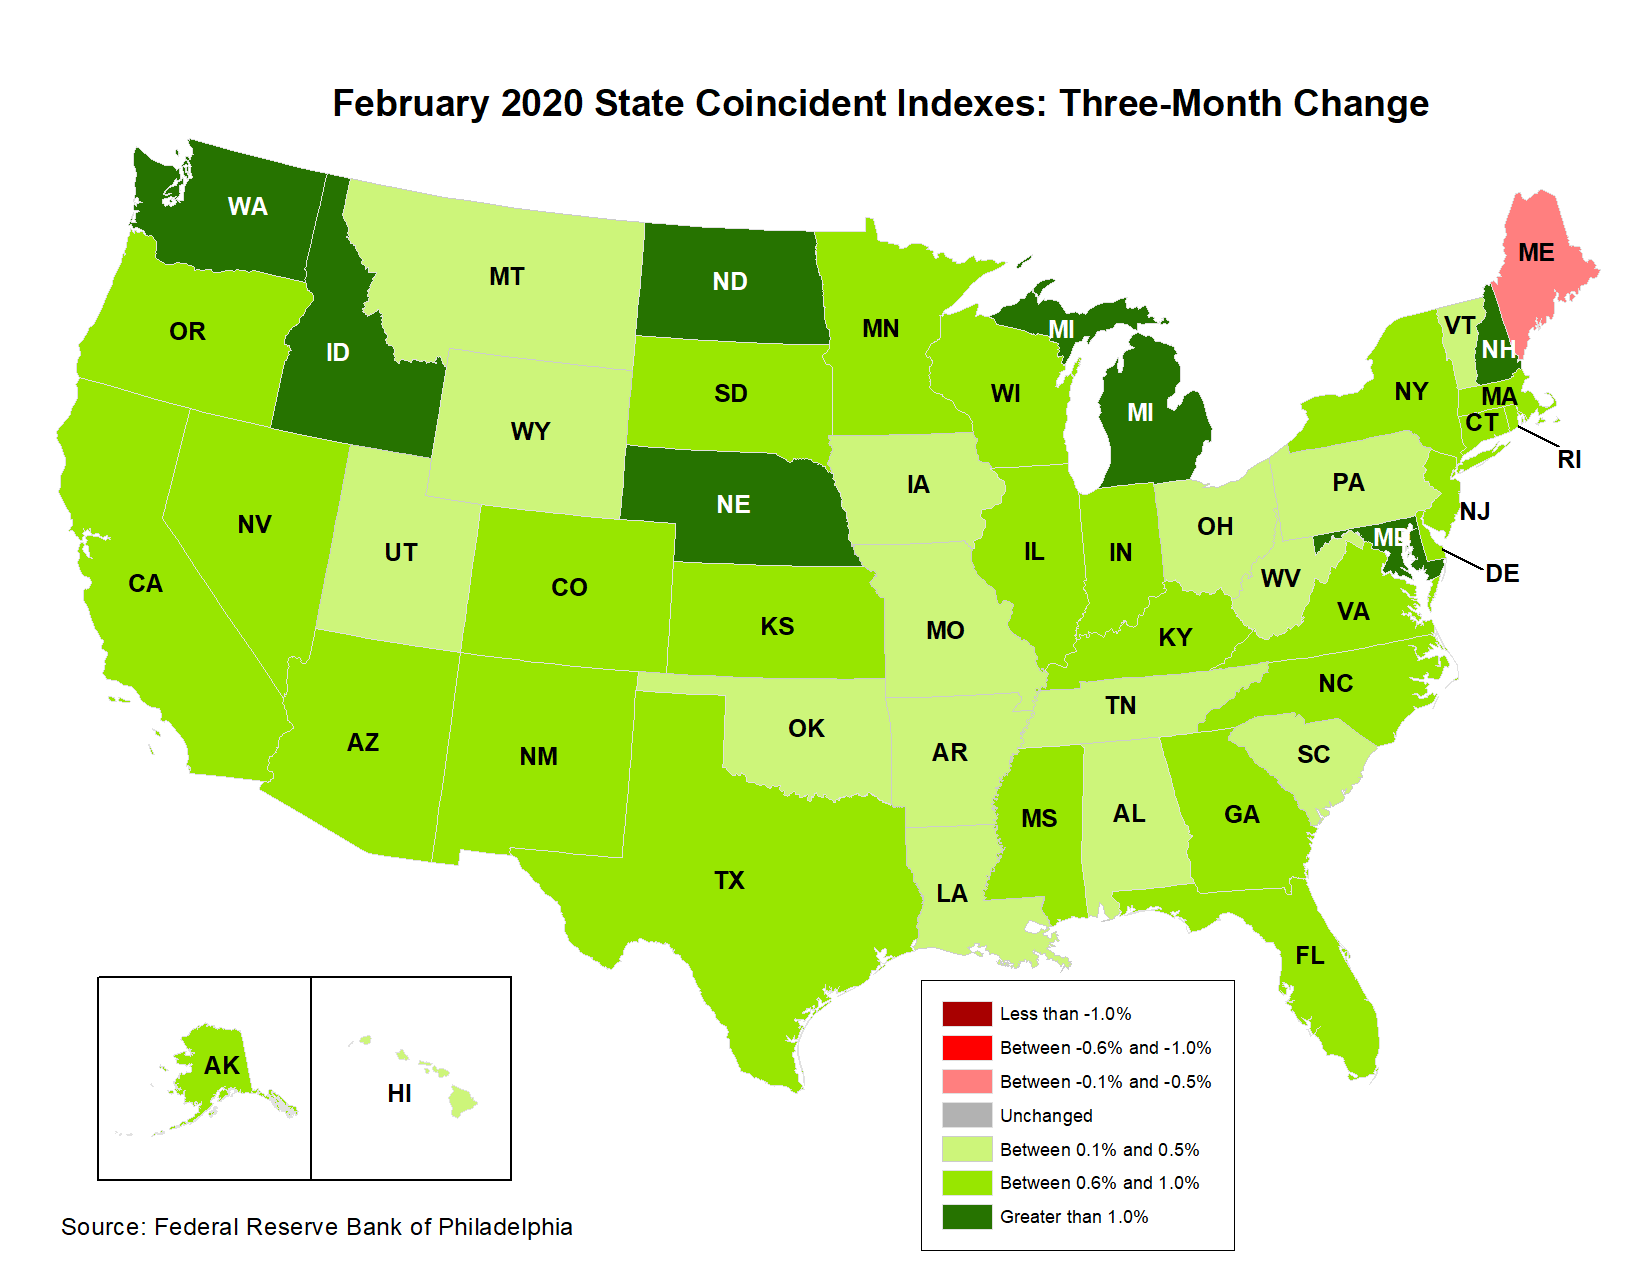 Map of the U.S. showing the State Coincident Indexes Three-Month Change in February 2020